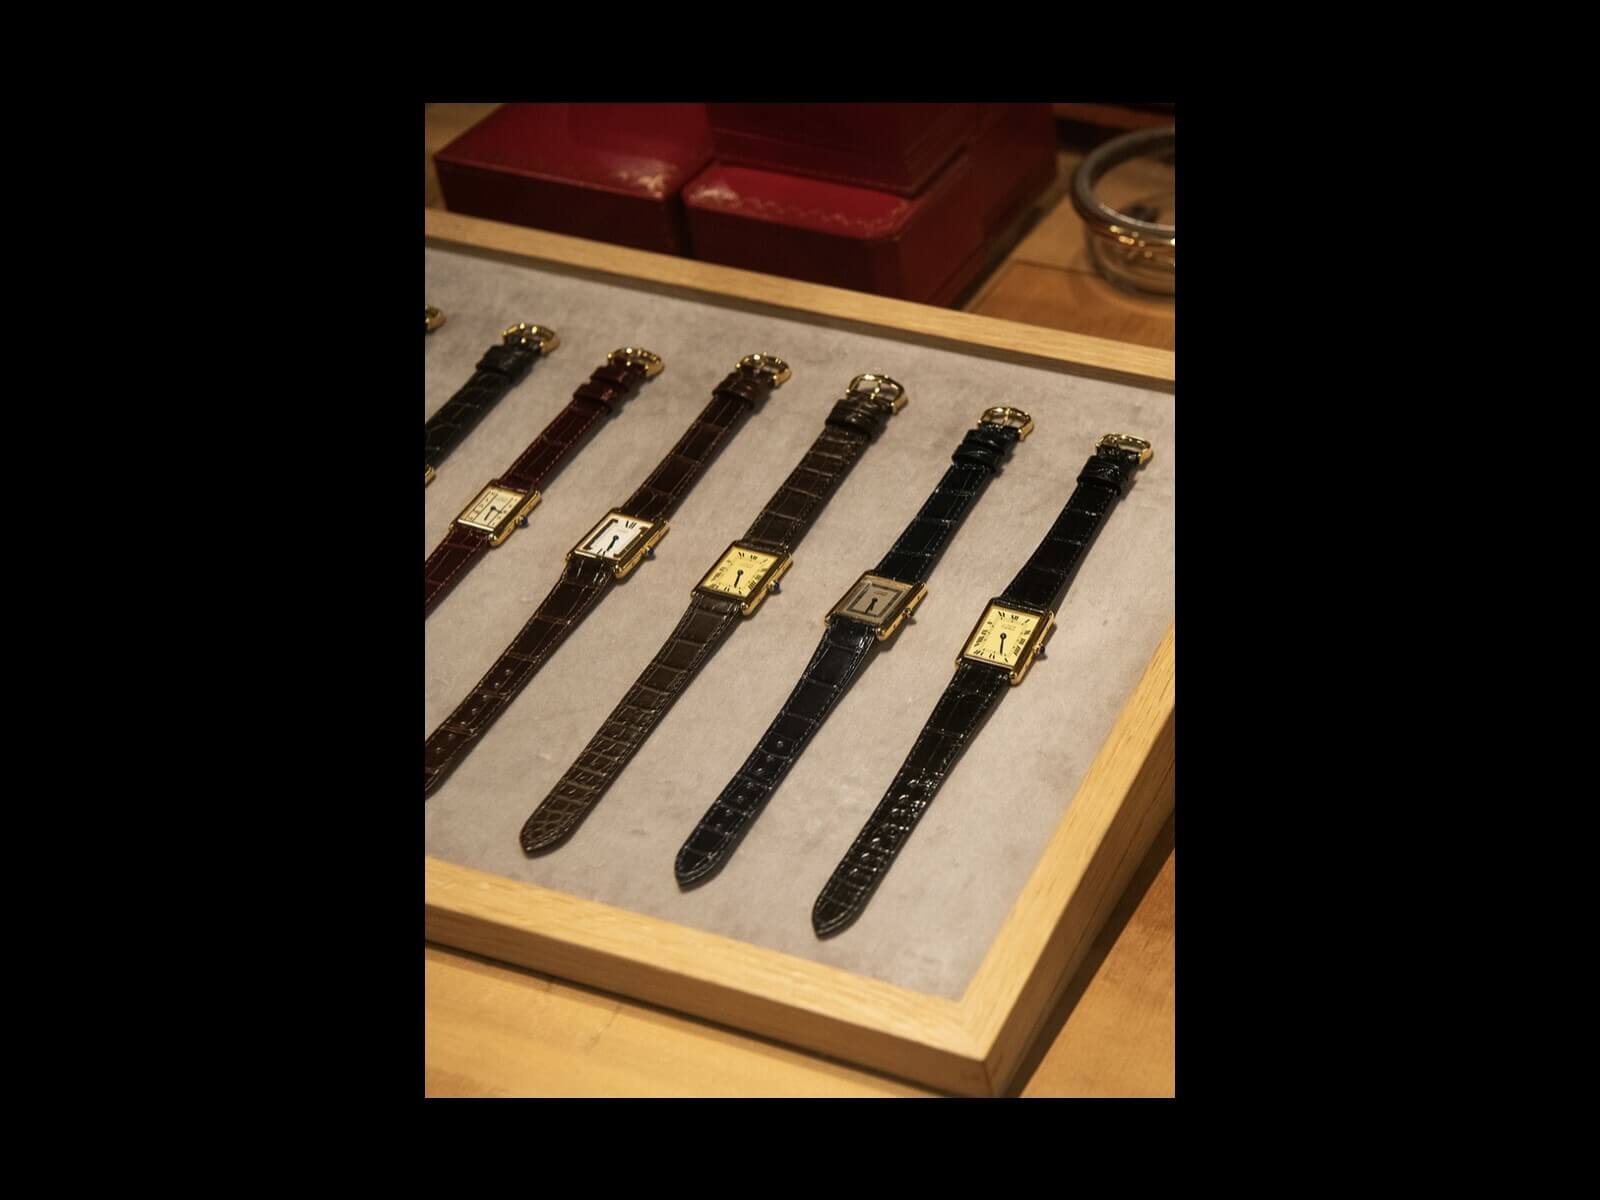 TOMORROW LAND -VINTAGE WATCH COLLECTION-